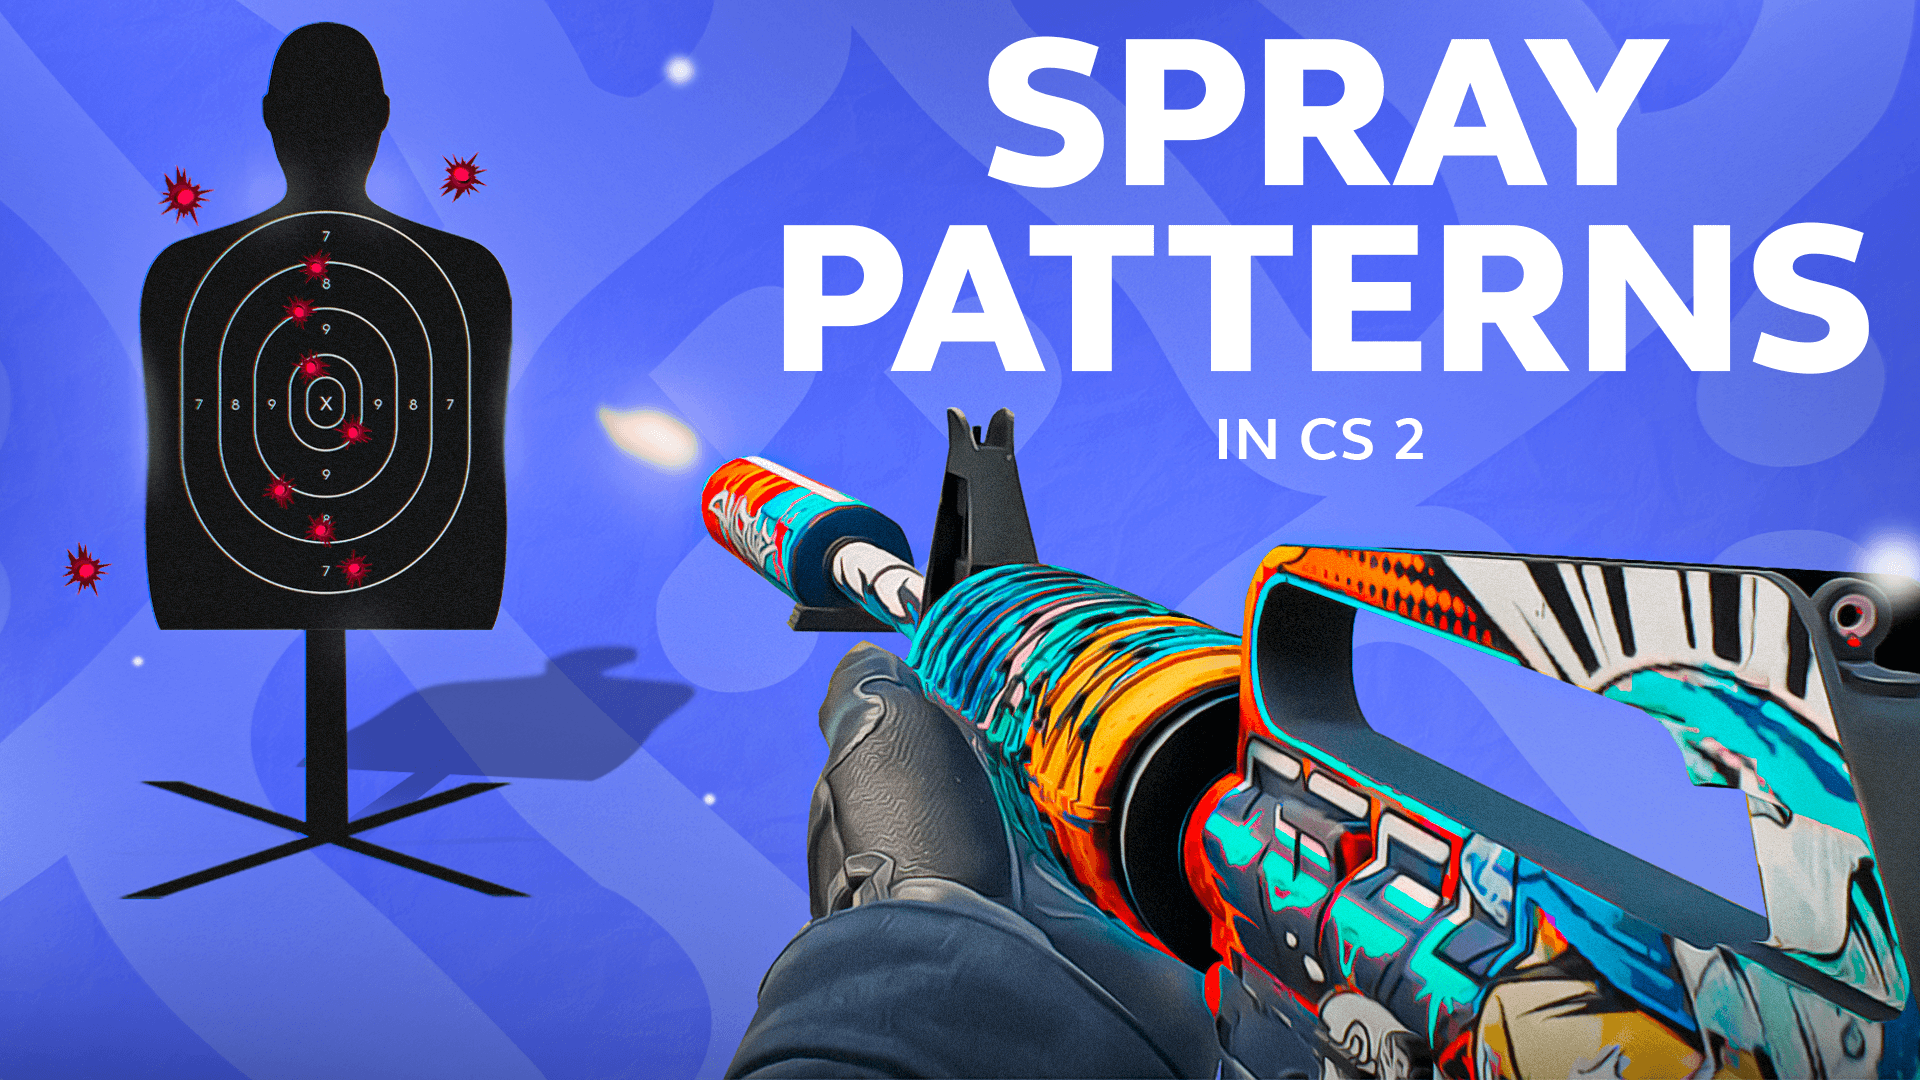 What Are Spray Patterns In CS2 And How To Learn Them?